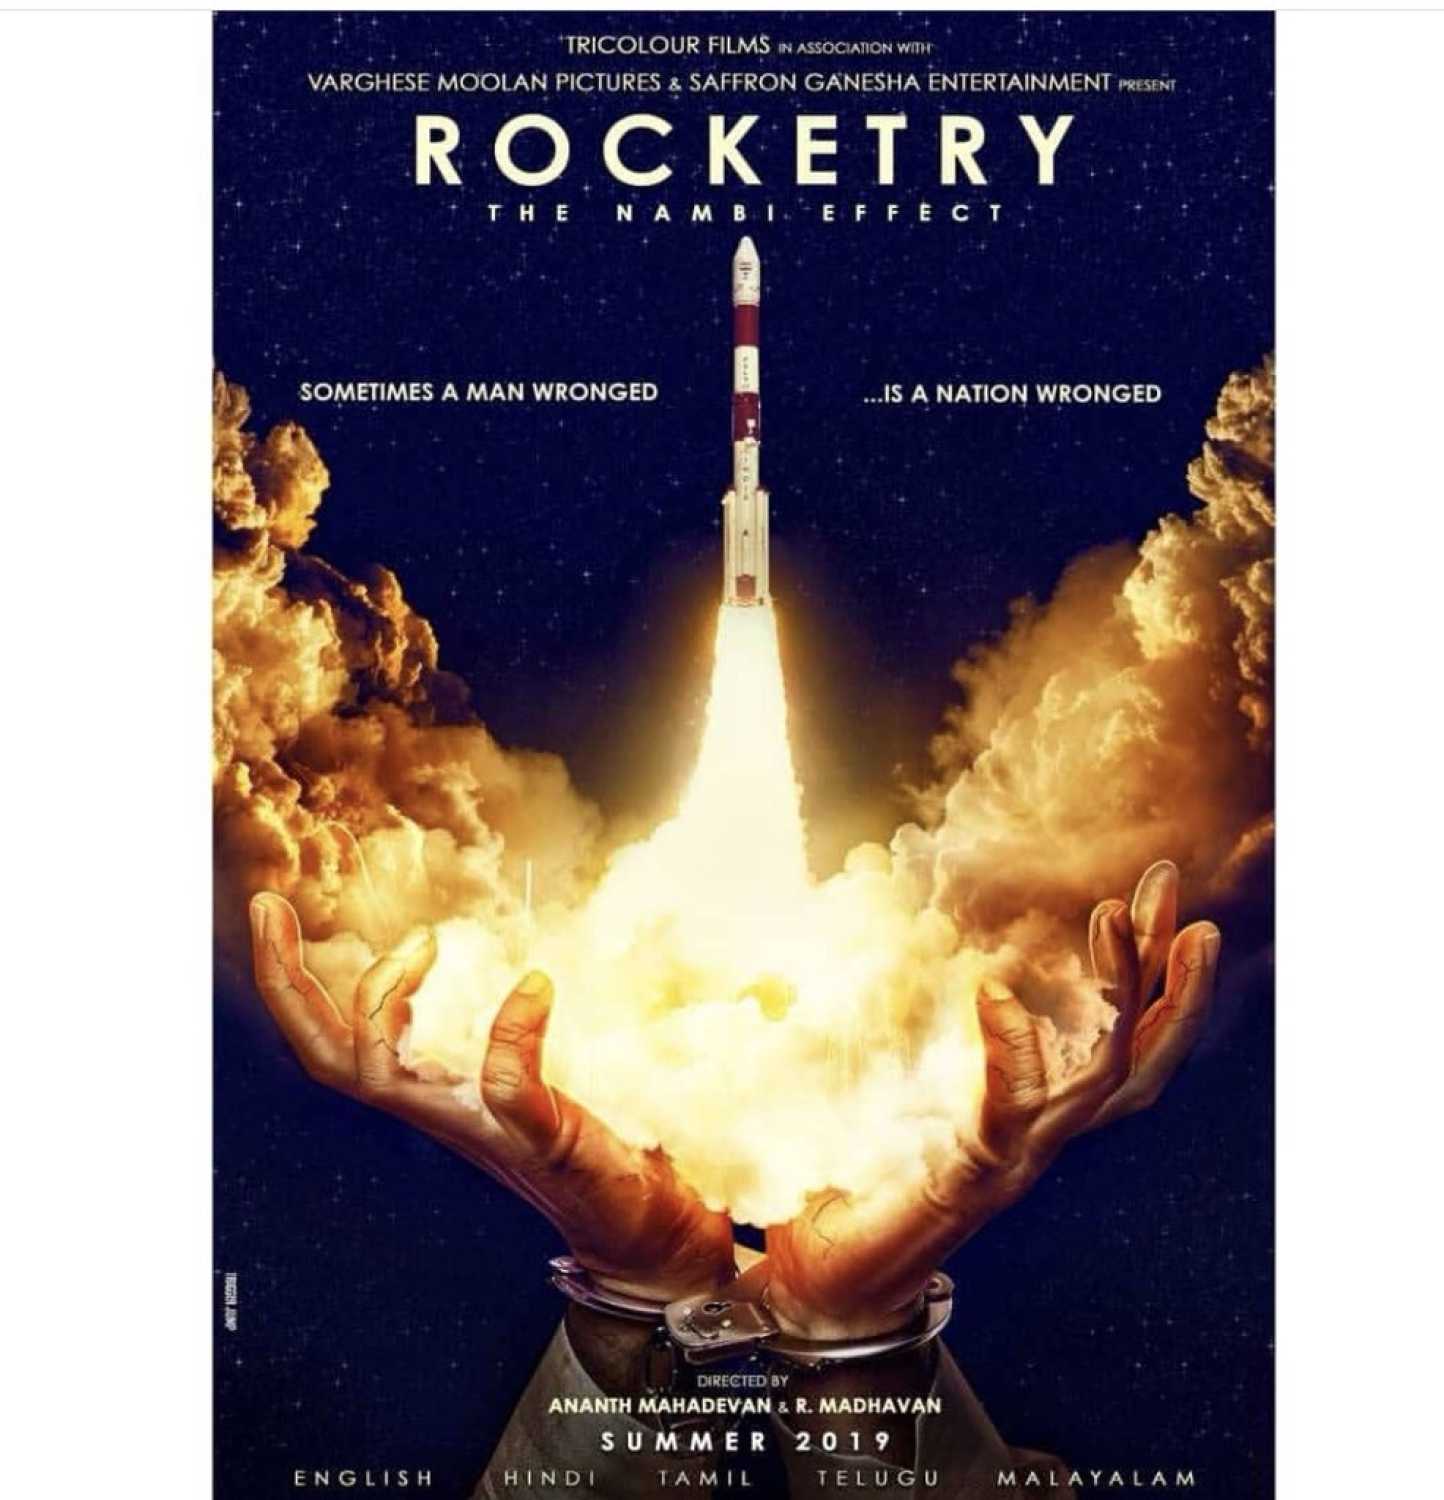 rocketry movie review in english